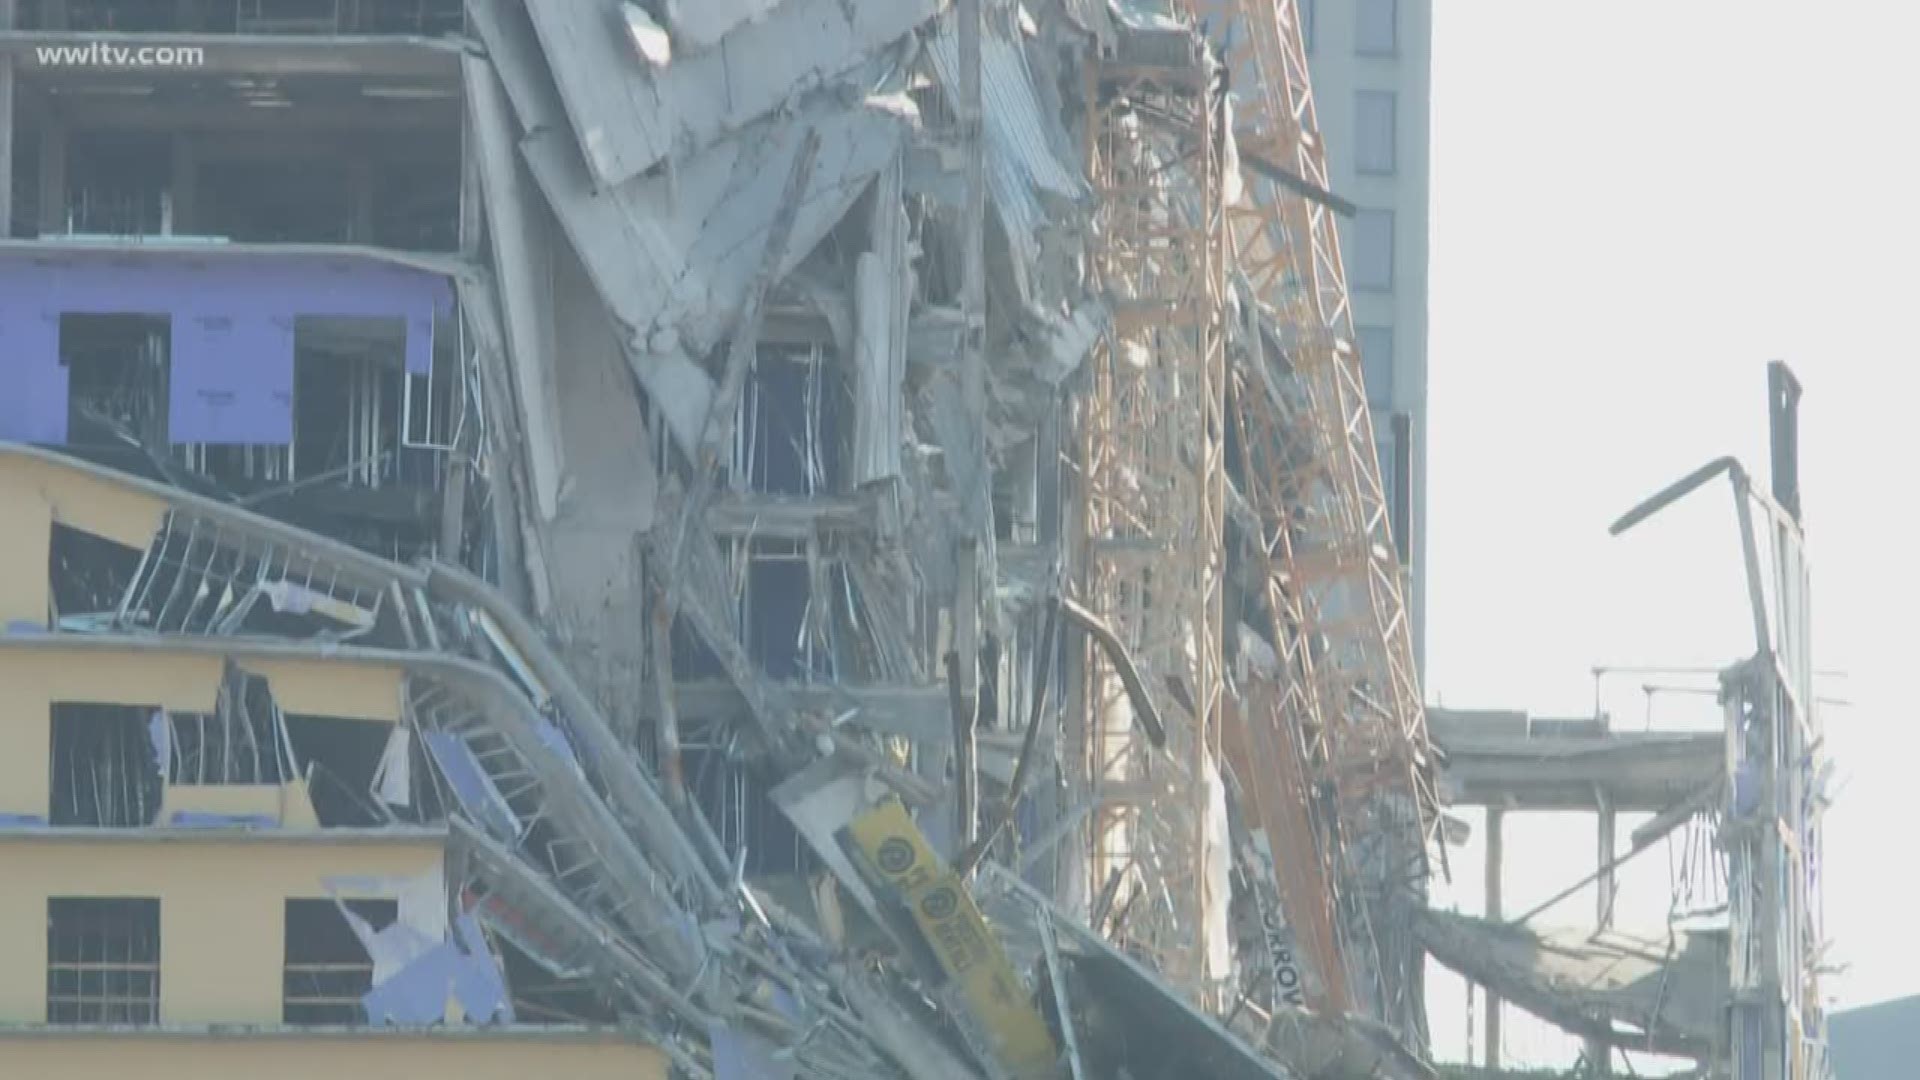 While people have expressed concern about crane remnants over and on Canal and Rampart Streets, officials say this is the safest the building has been in days.